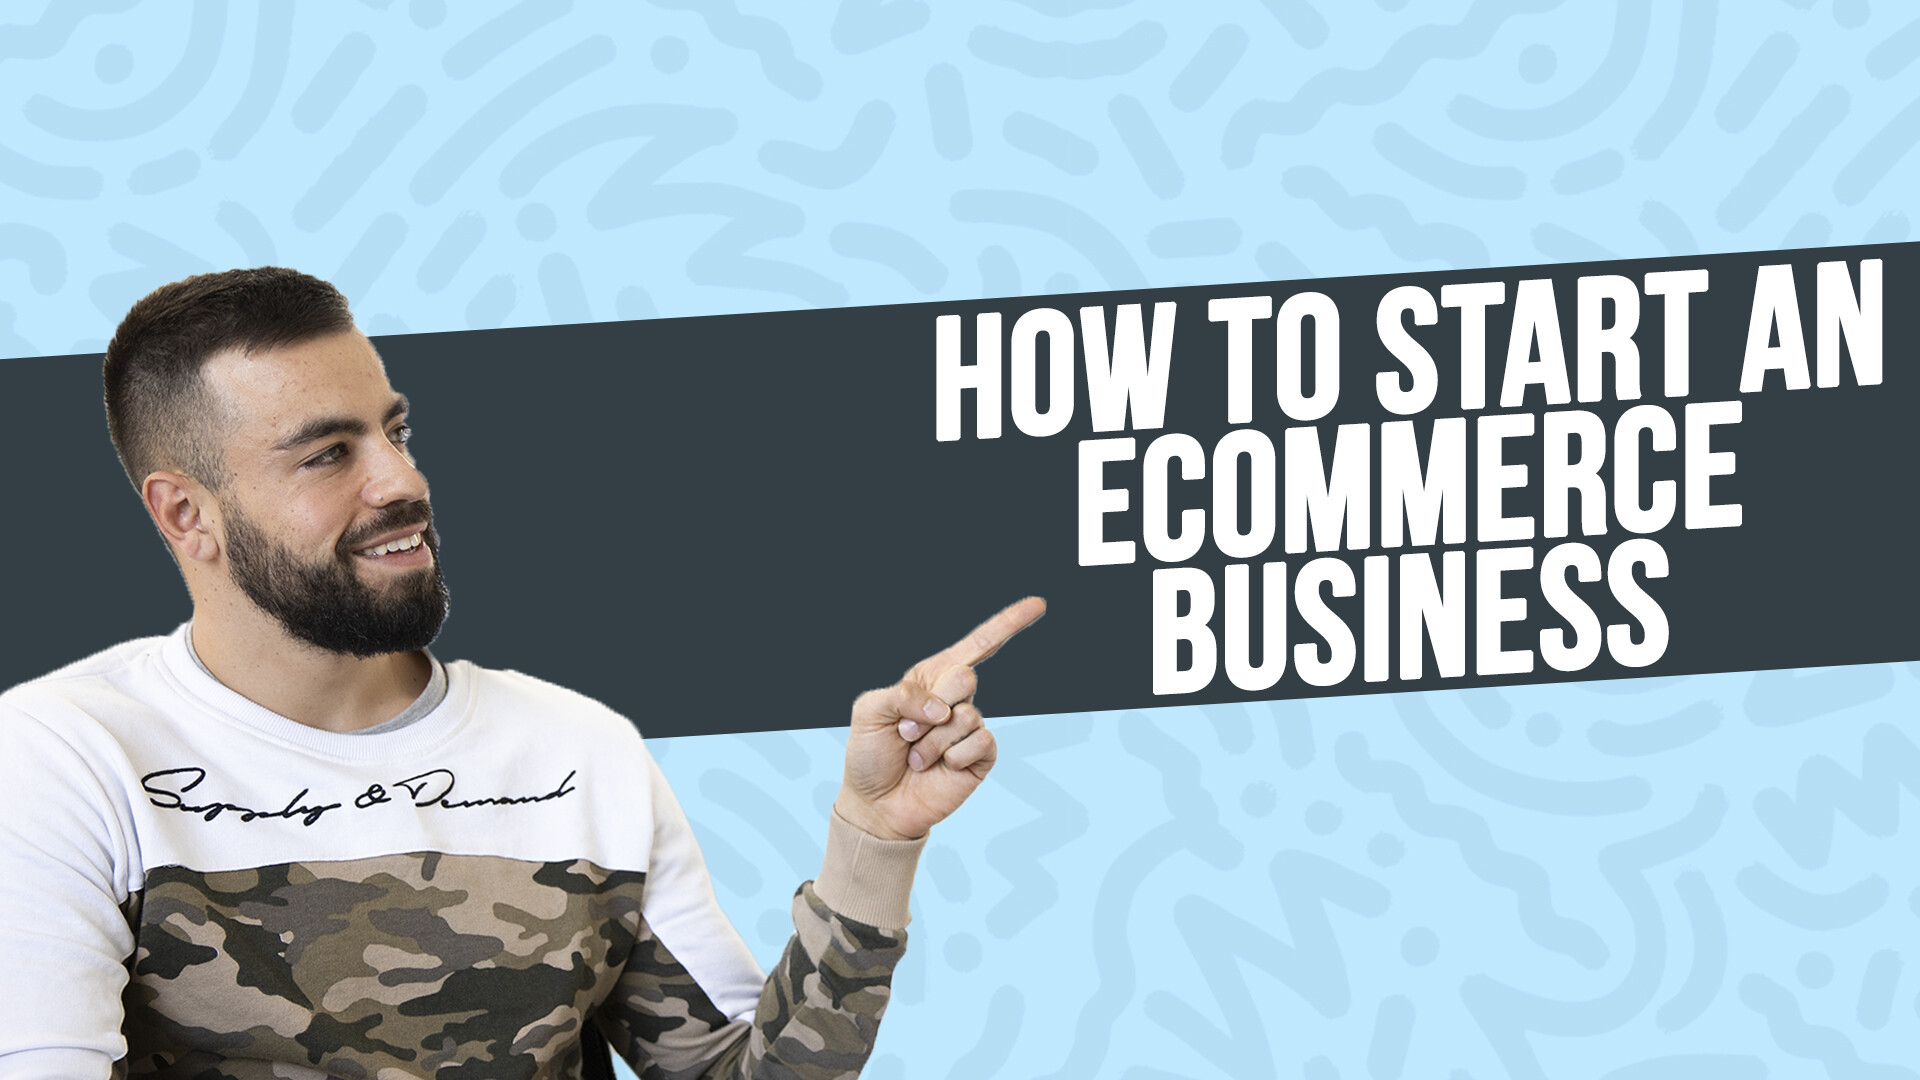 how-to-start-an-ecommerce-business-for-beginners-2020